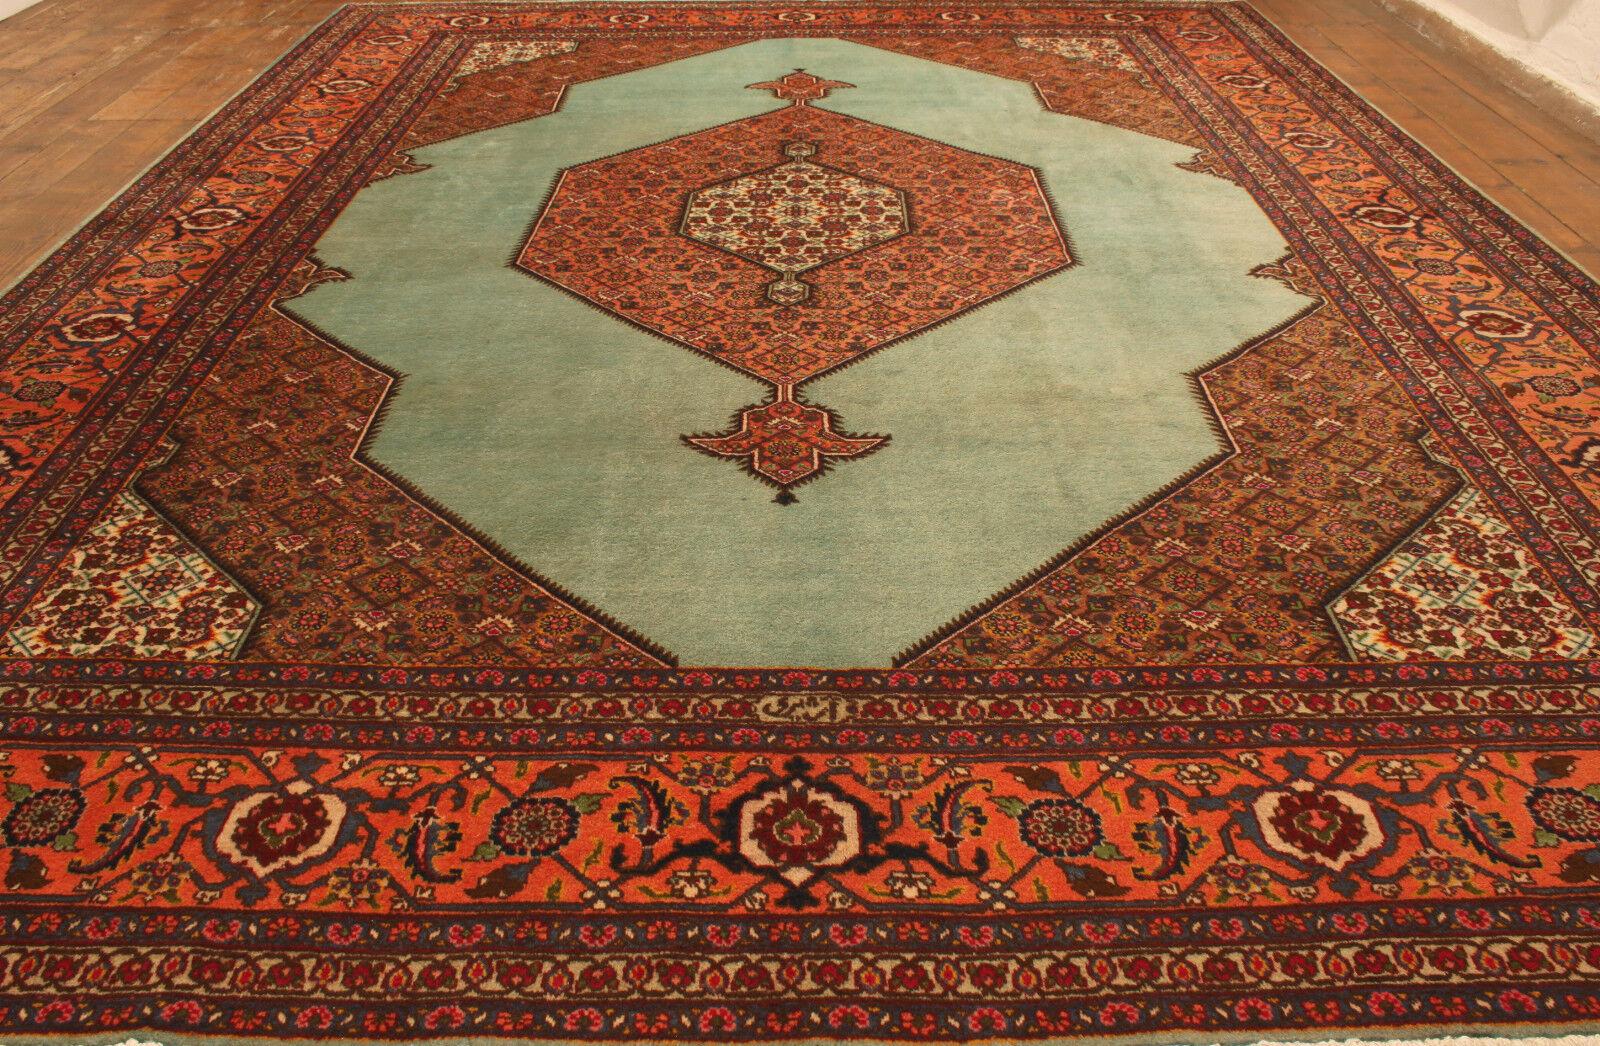 Wool Handmade Vintage Persian Style Tabriz Rug 9.6' x 13.2', 1970s - 1T42 For Sale